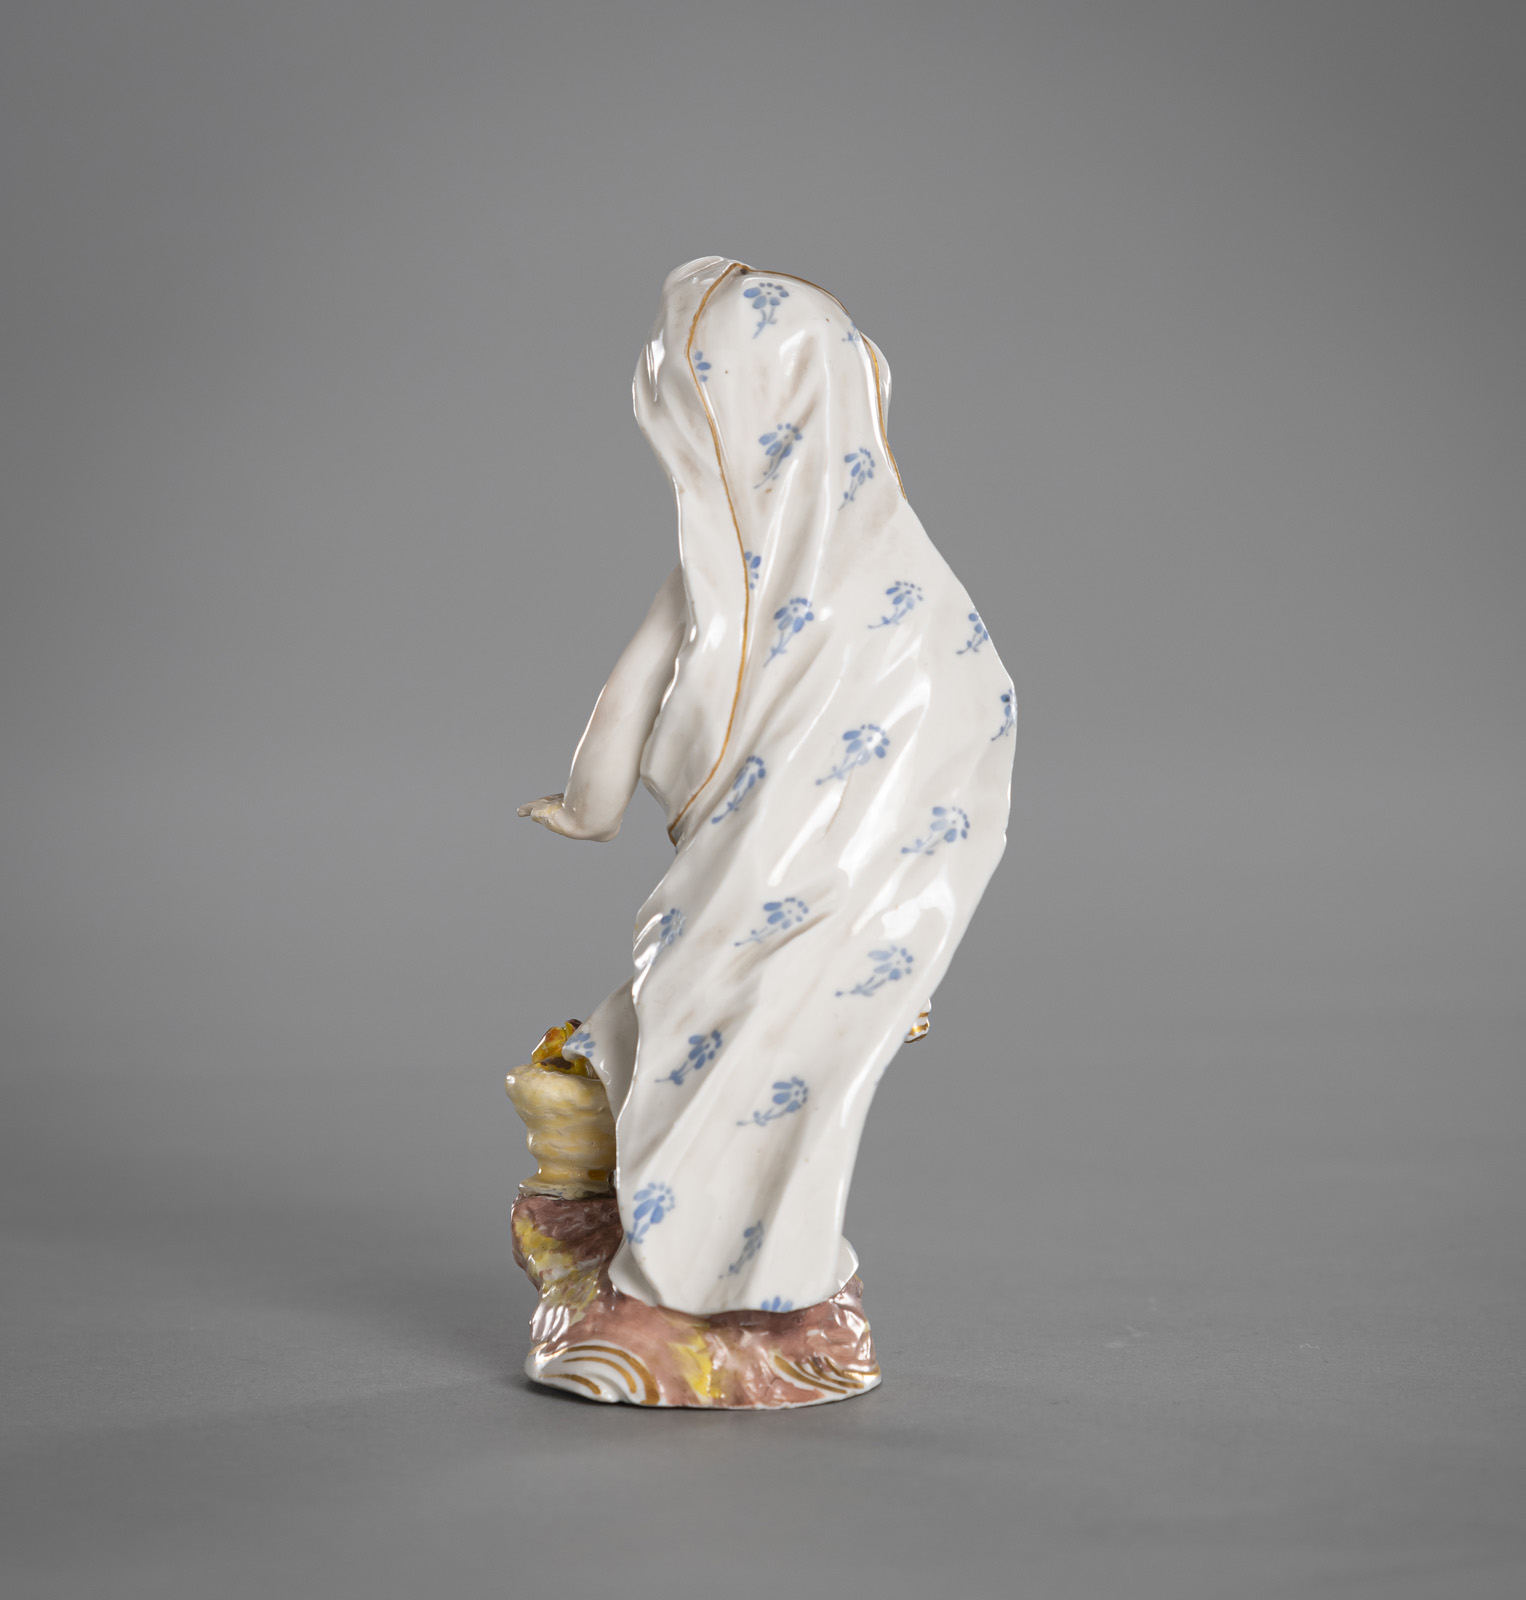 A FIGURINE OF A PUTTO DEPICTING THE WINTER - Image 3 of 4